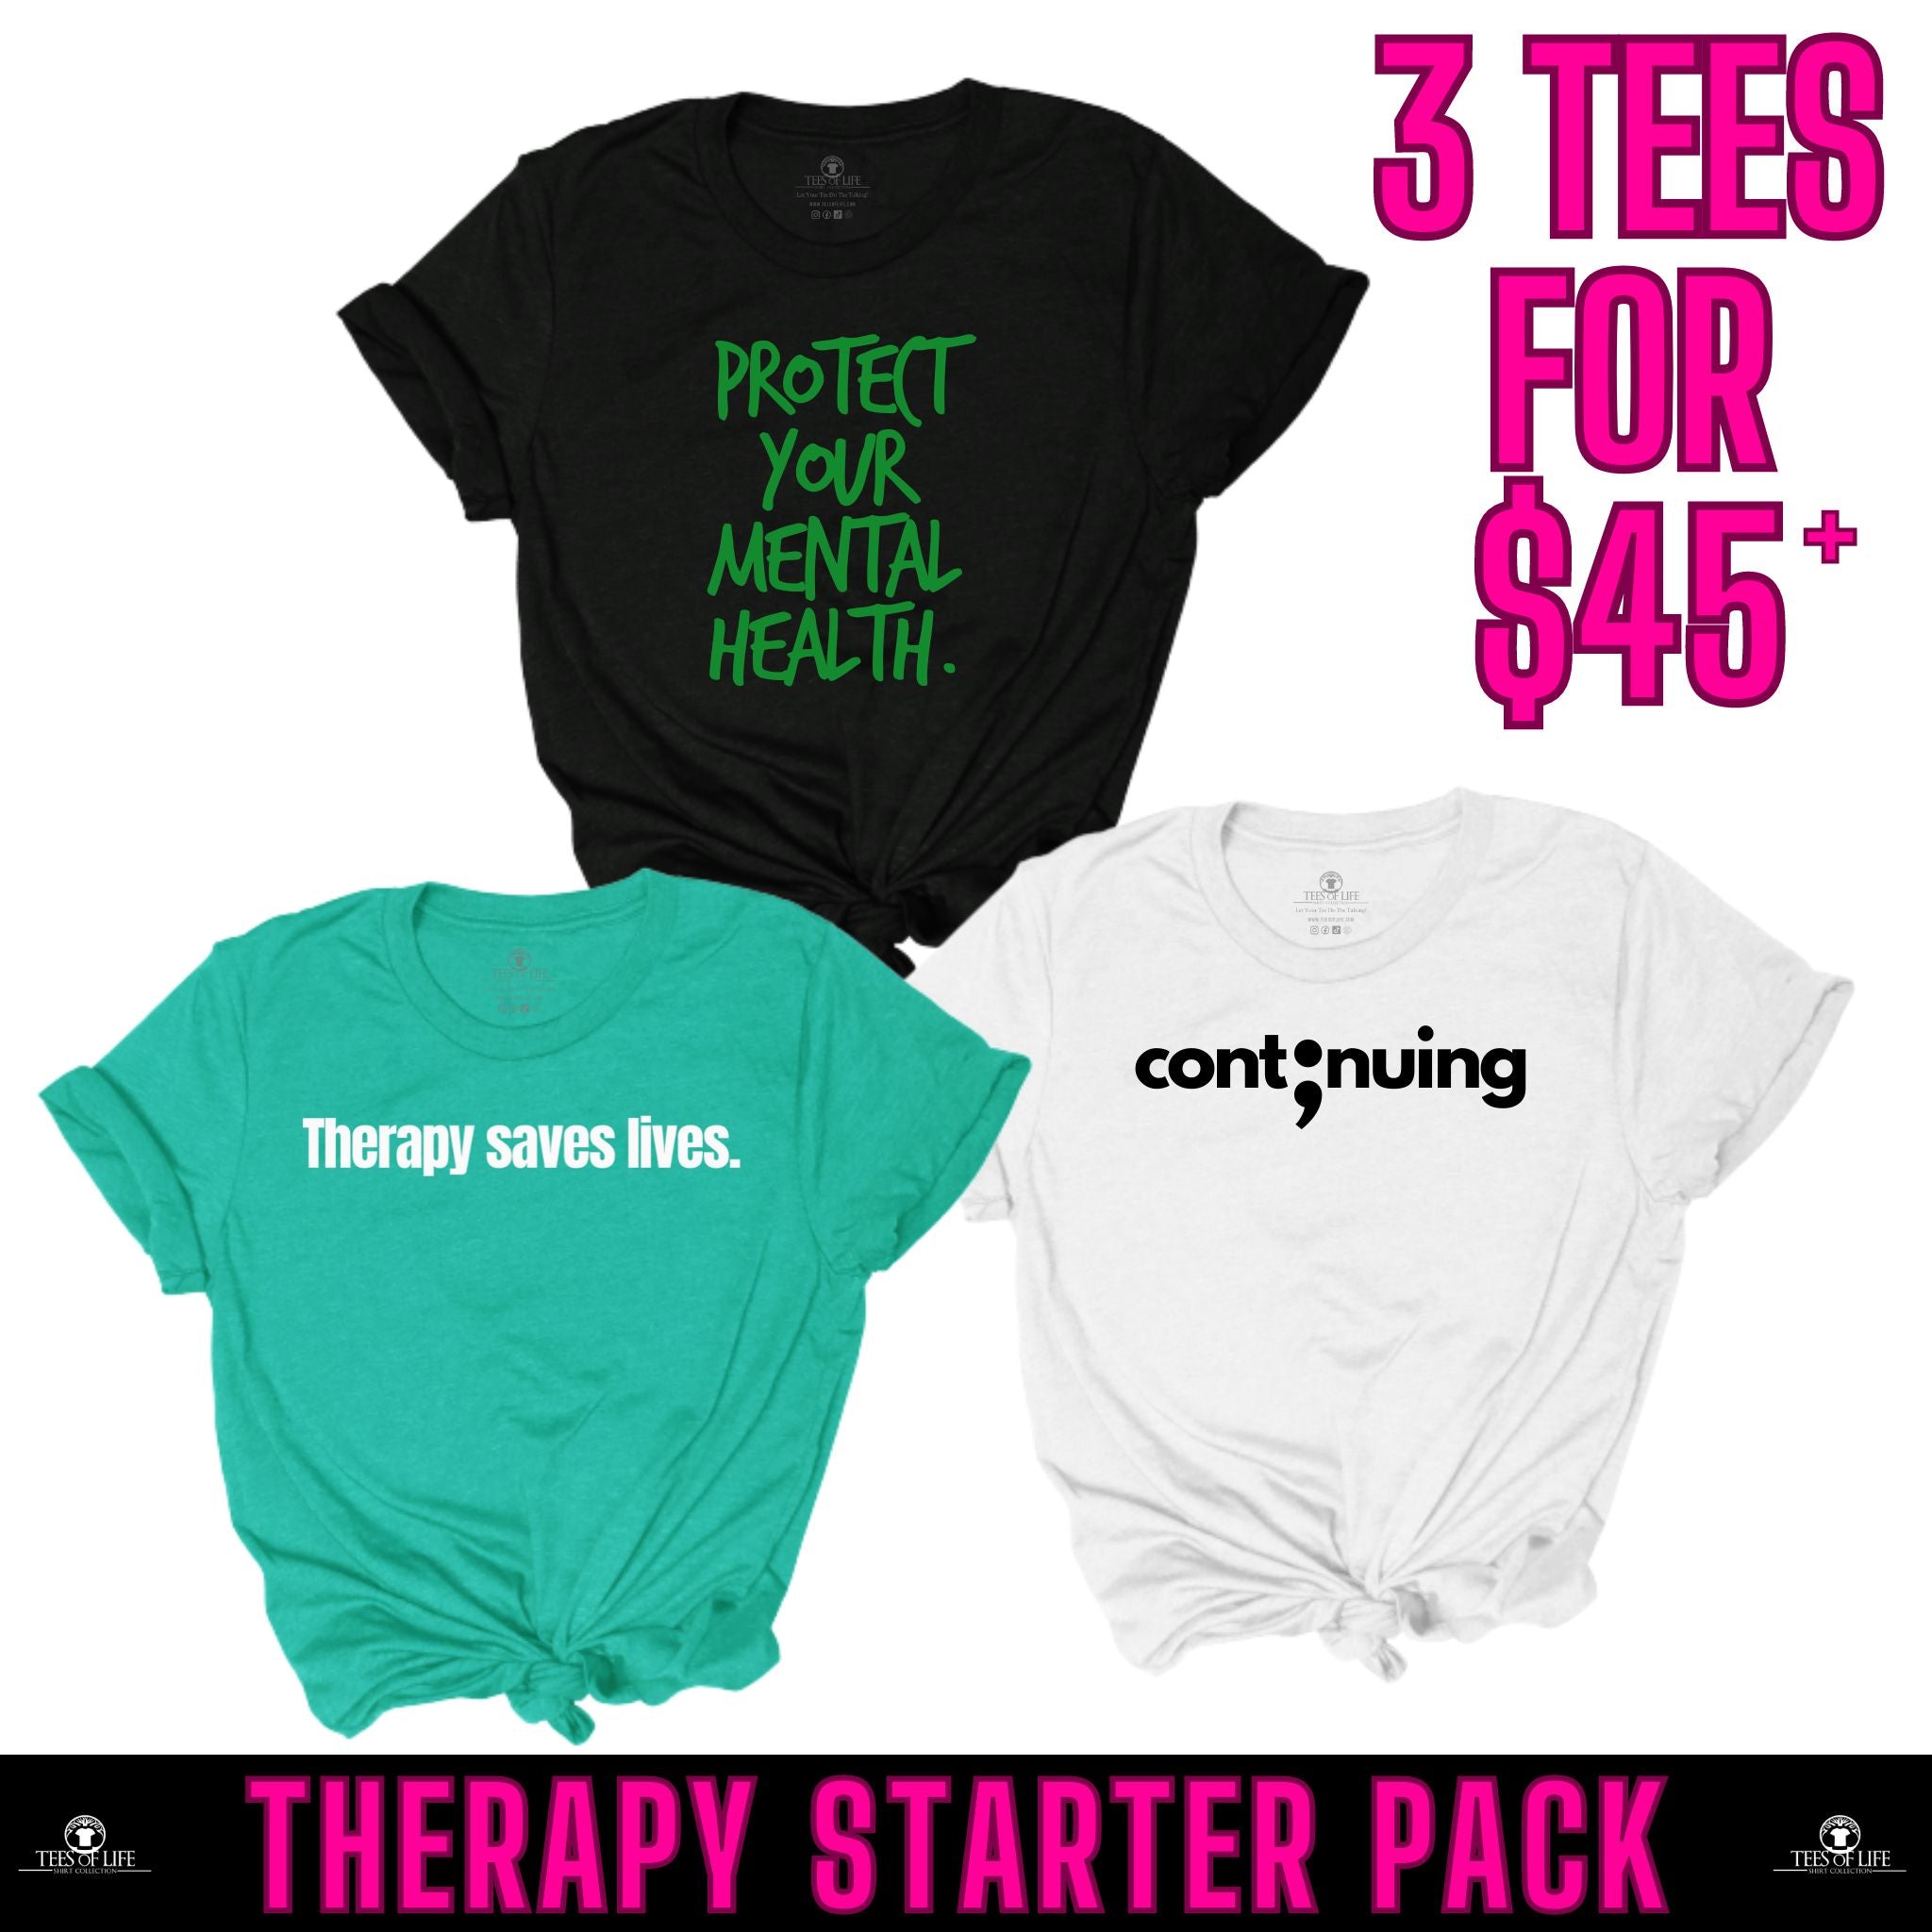 Therapy Starter Pack  (Protect Your Mental Green, Therapy Saves White, Cont;nuing Black) Unisex Tees